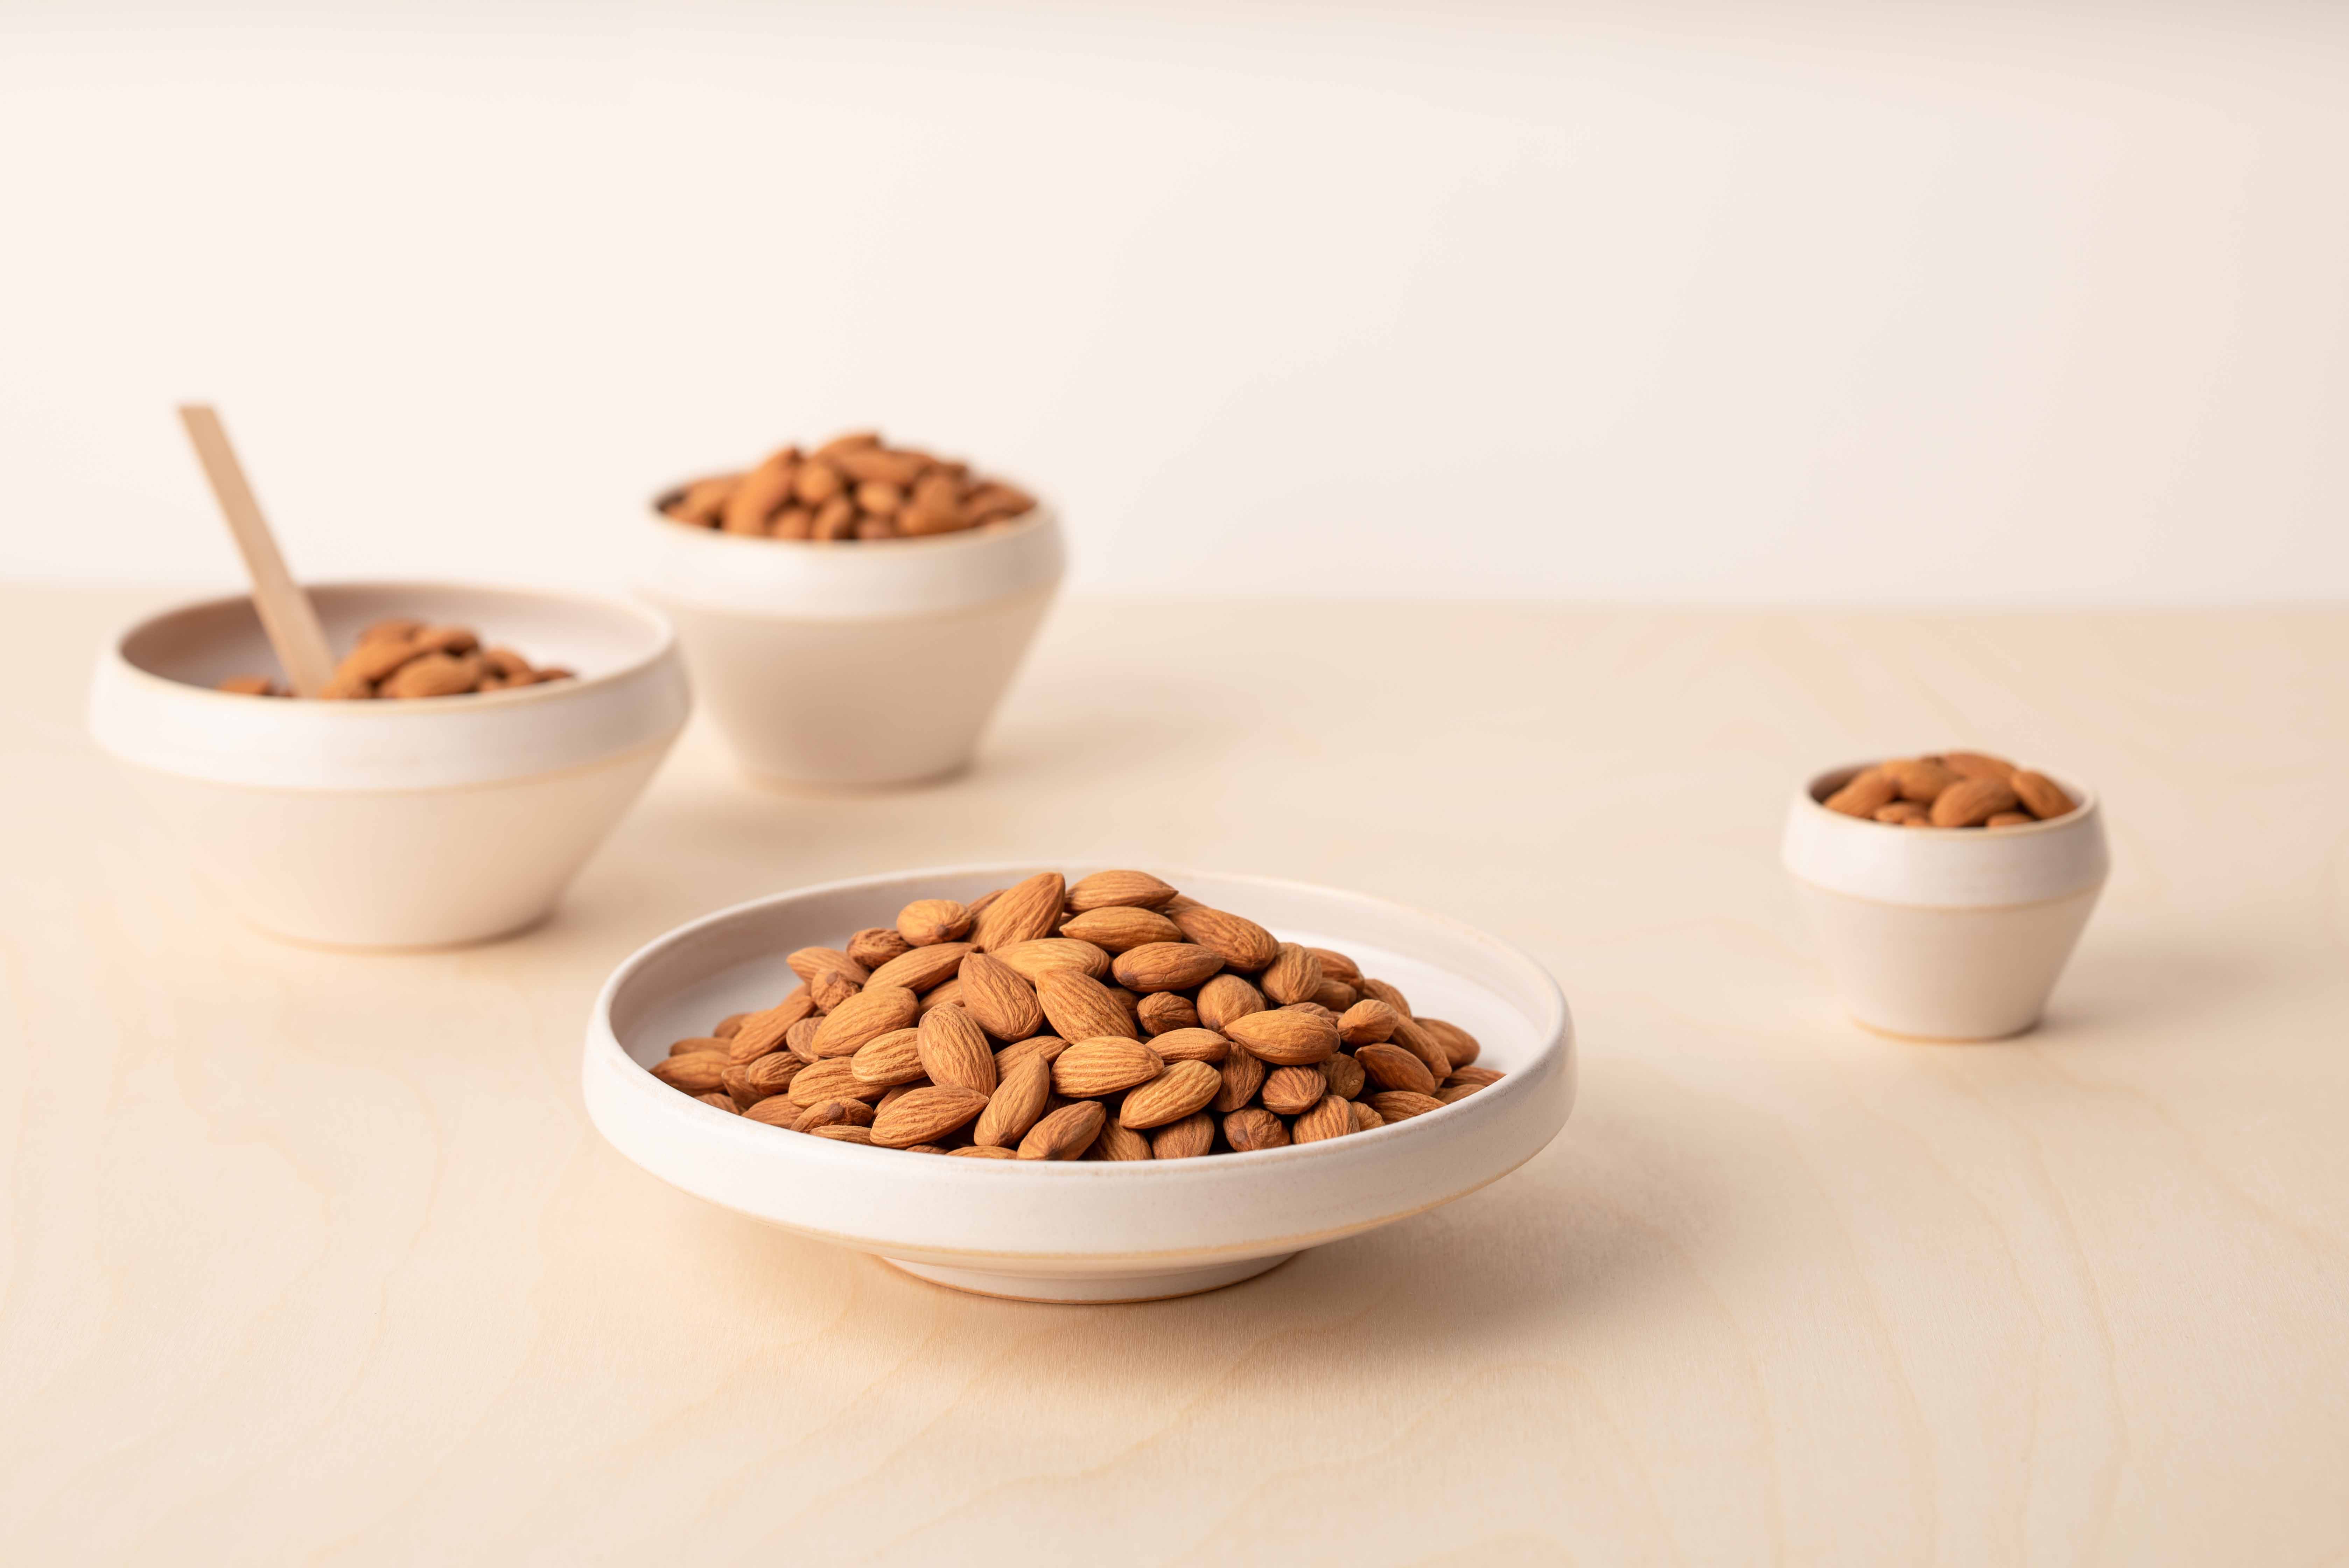 Help your family embrace a healthier lifestyle with almonds